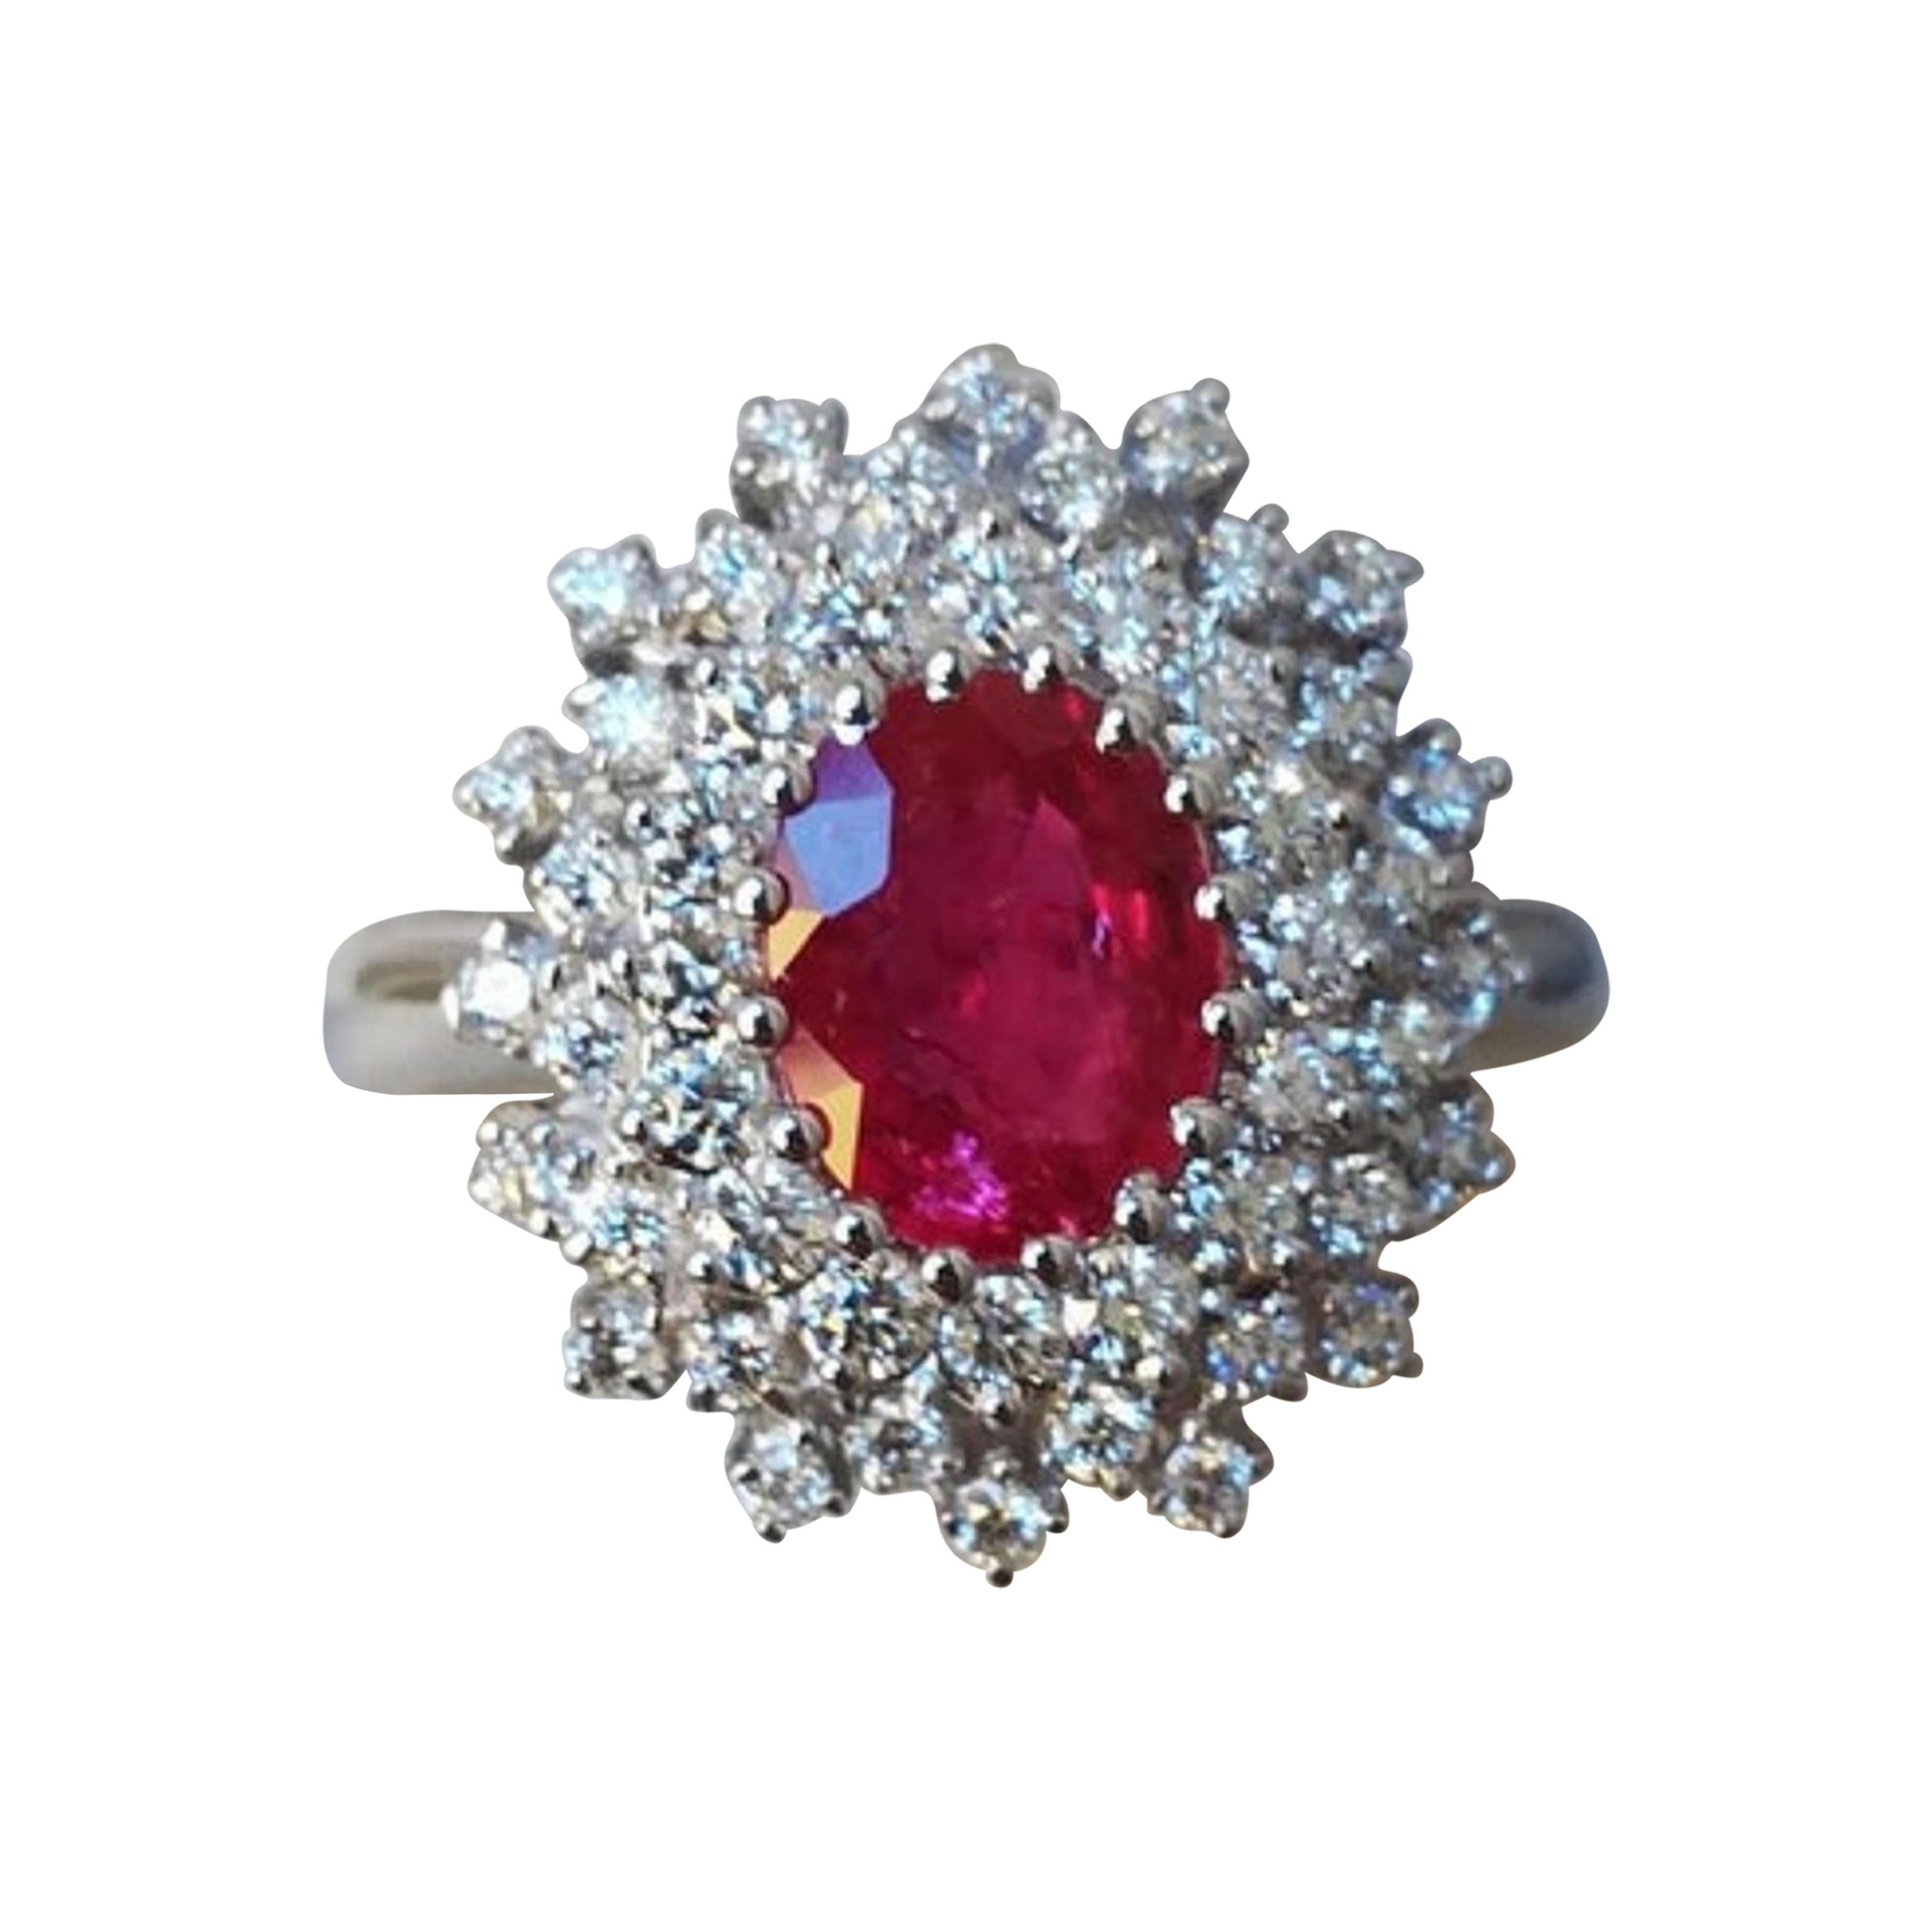 Certified Burma Red Ruby and White Diamond 18 Carat White Gold Cocktail Ring